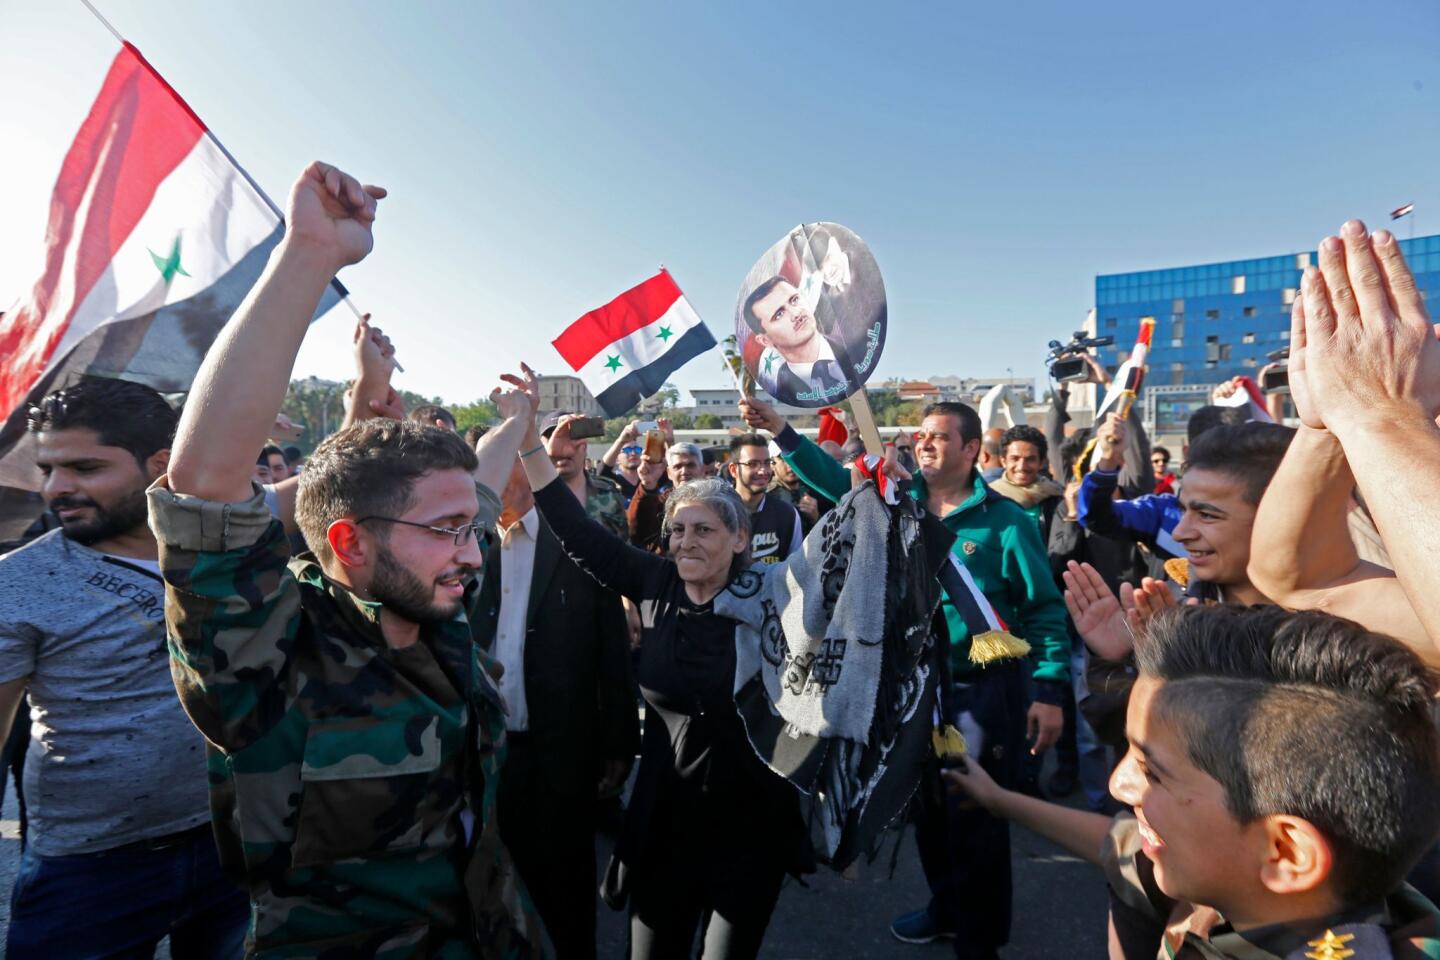 Syrians wave the national flag and portraits of President Bashar Assad as they gather in Damascus after the airstrikes.